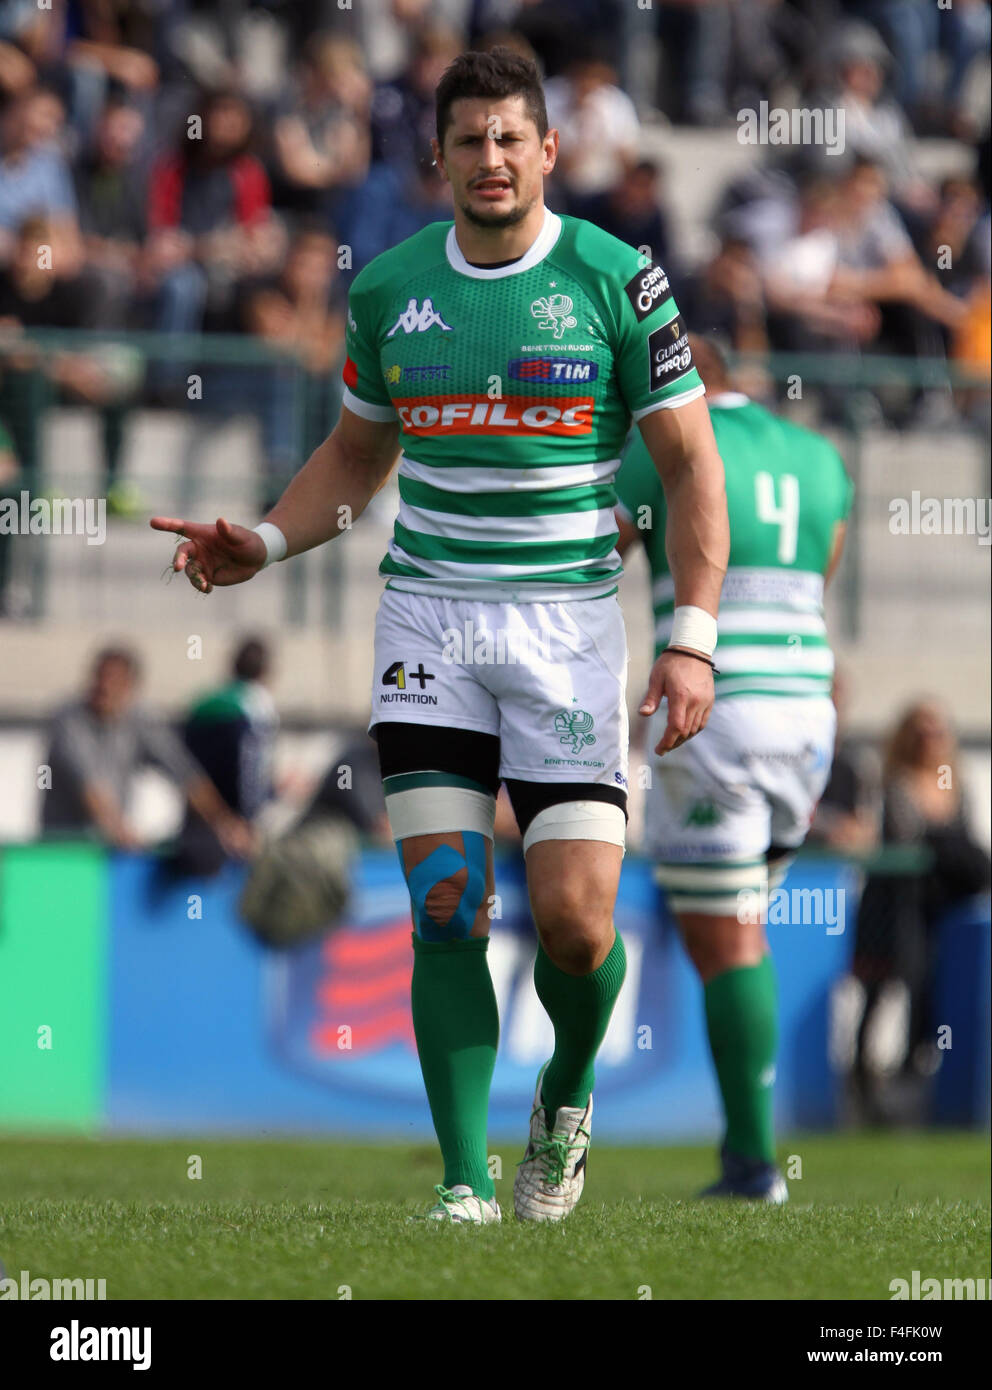 ITALY, Treviso: Benetton Treviso's player Alessandro Zanni gestures during  Rugby Guinness Pro12 match between Benetton Treviso and Ospreys on 17th  October, 2015 in Treviso Credit: Andrea Spinelli/Alamy Live News Stock  Photo -